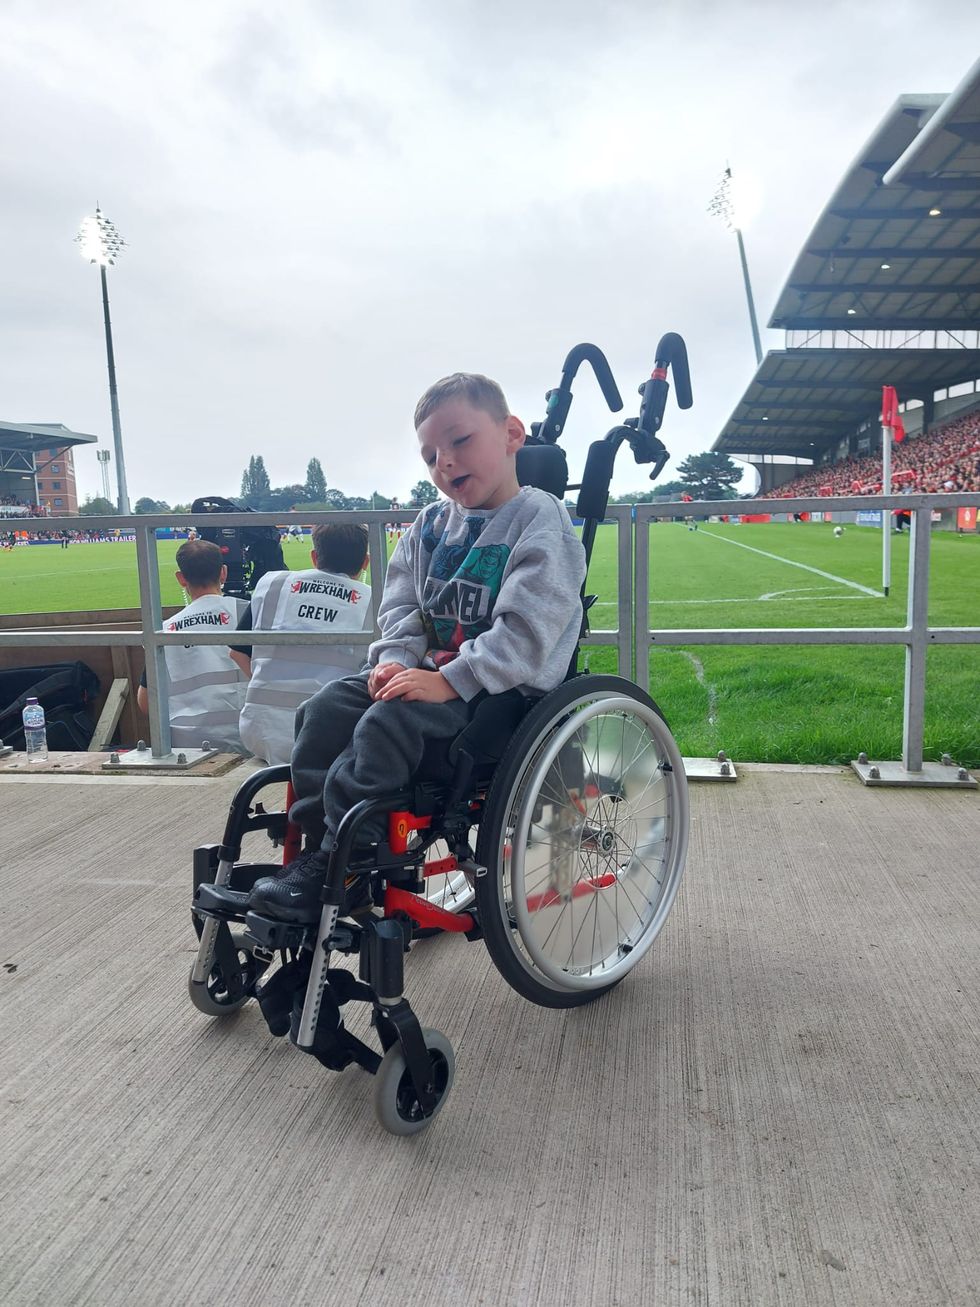 Charity football match organised for disabled boy supported by celebrities